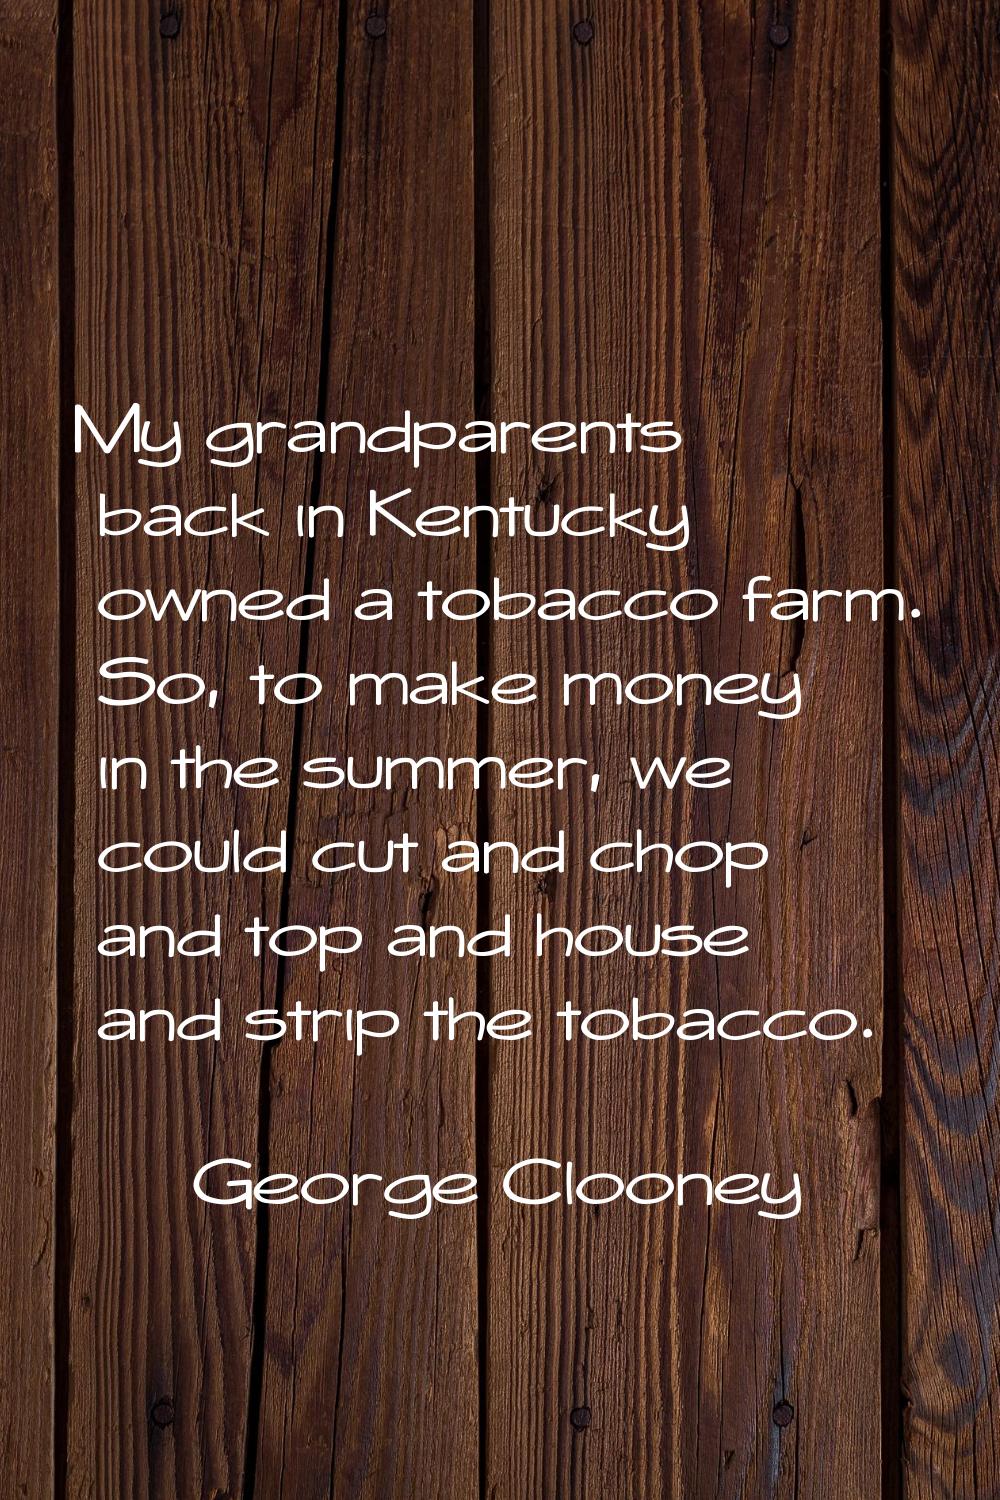 My grandparents back in Kentucky owned a tobacco farm. So, to make money in the summer, we could cu